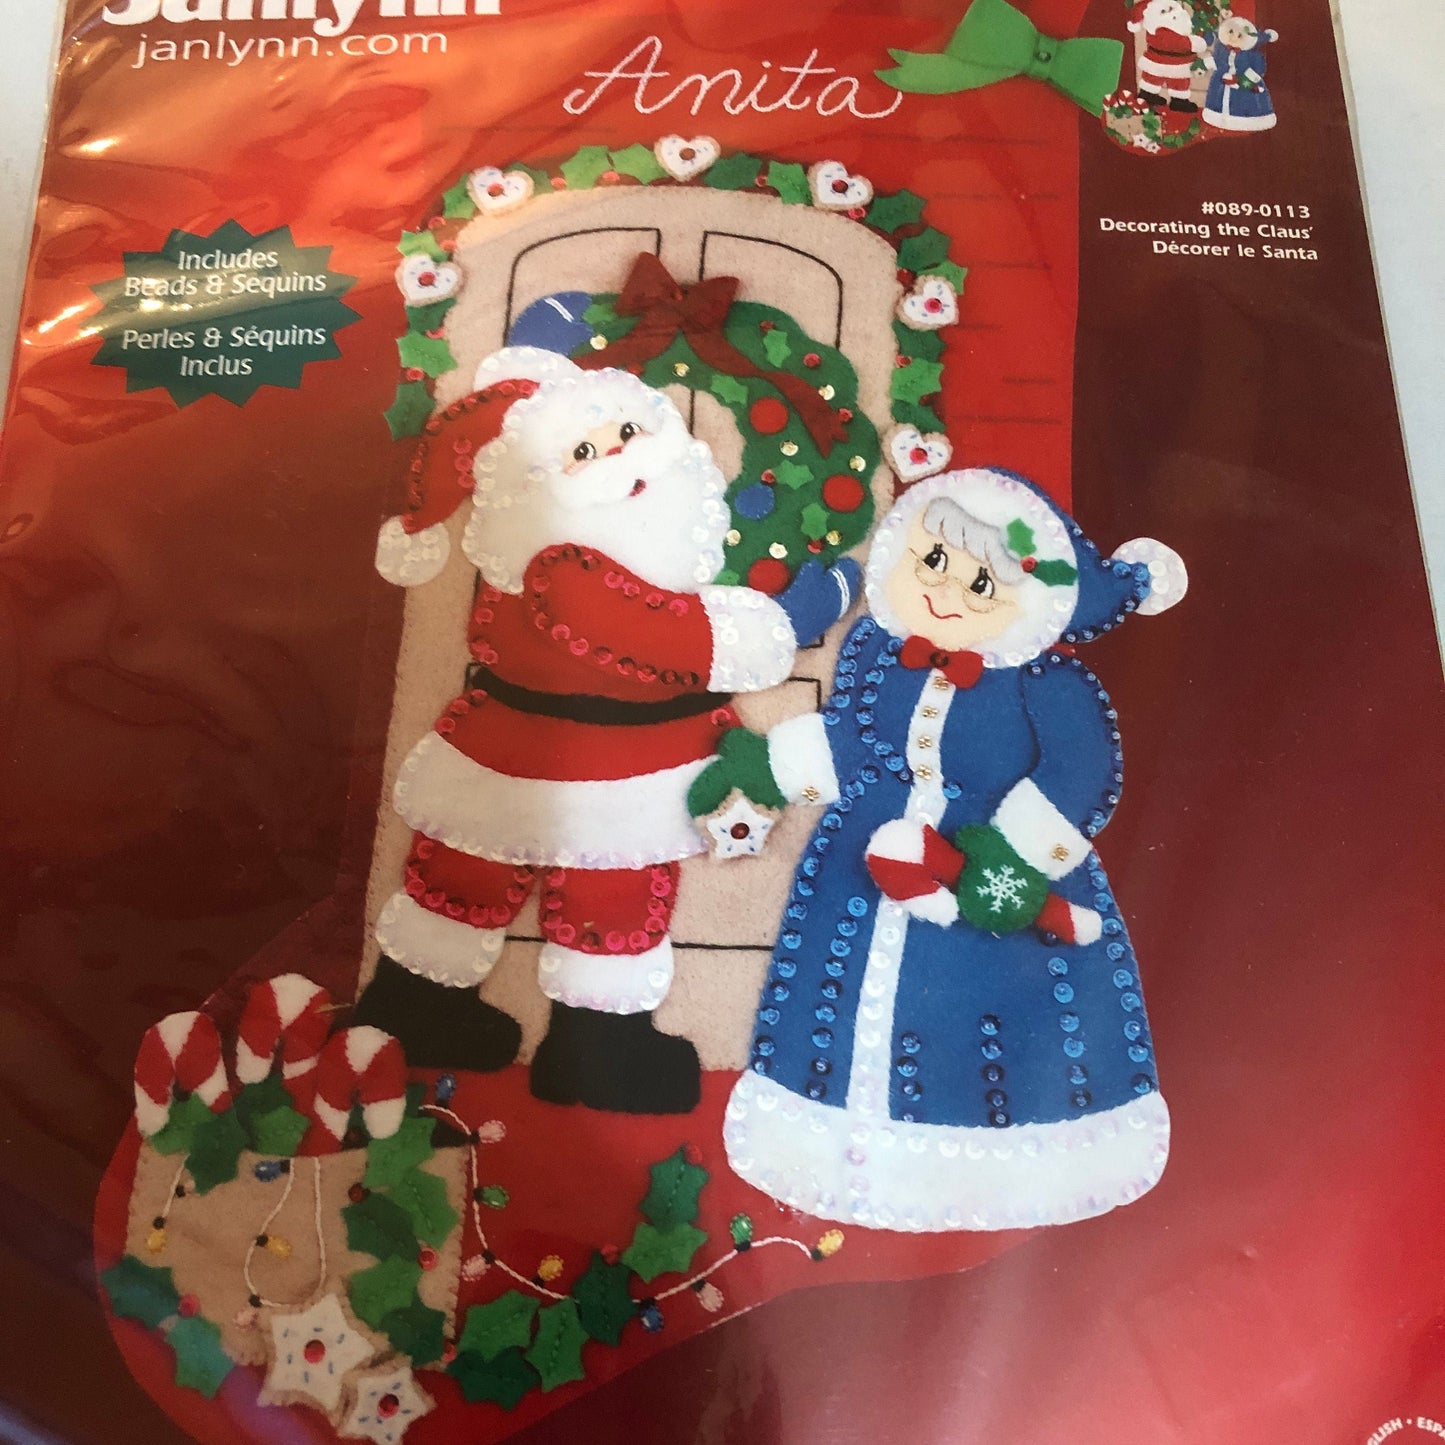 Janlynn, Decorating the Clause, 18 inch Stocking Felt Applique Kit